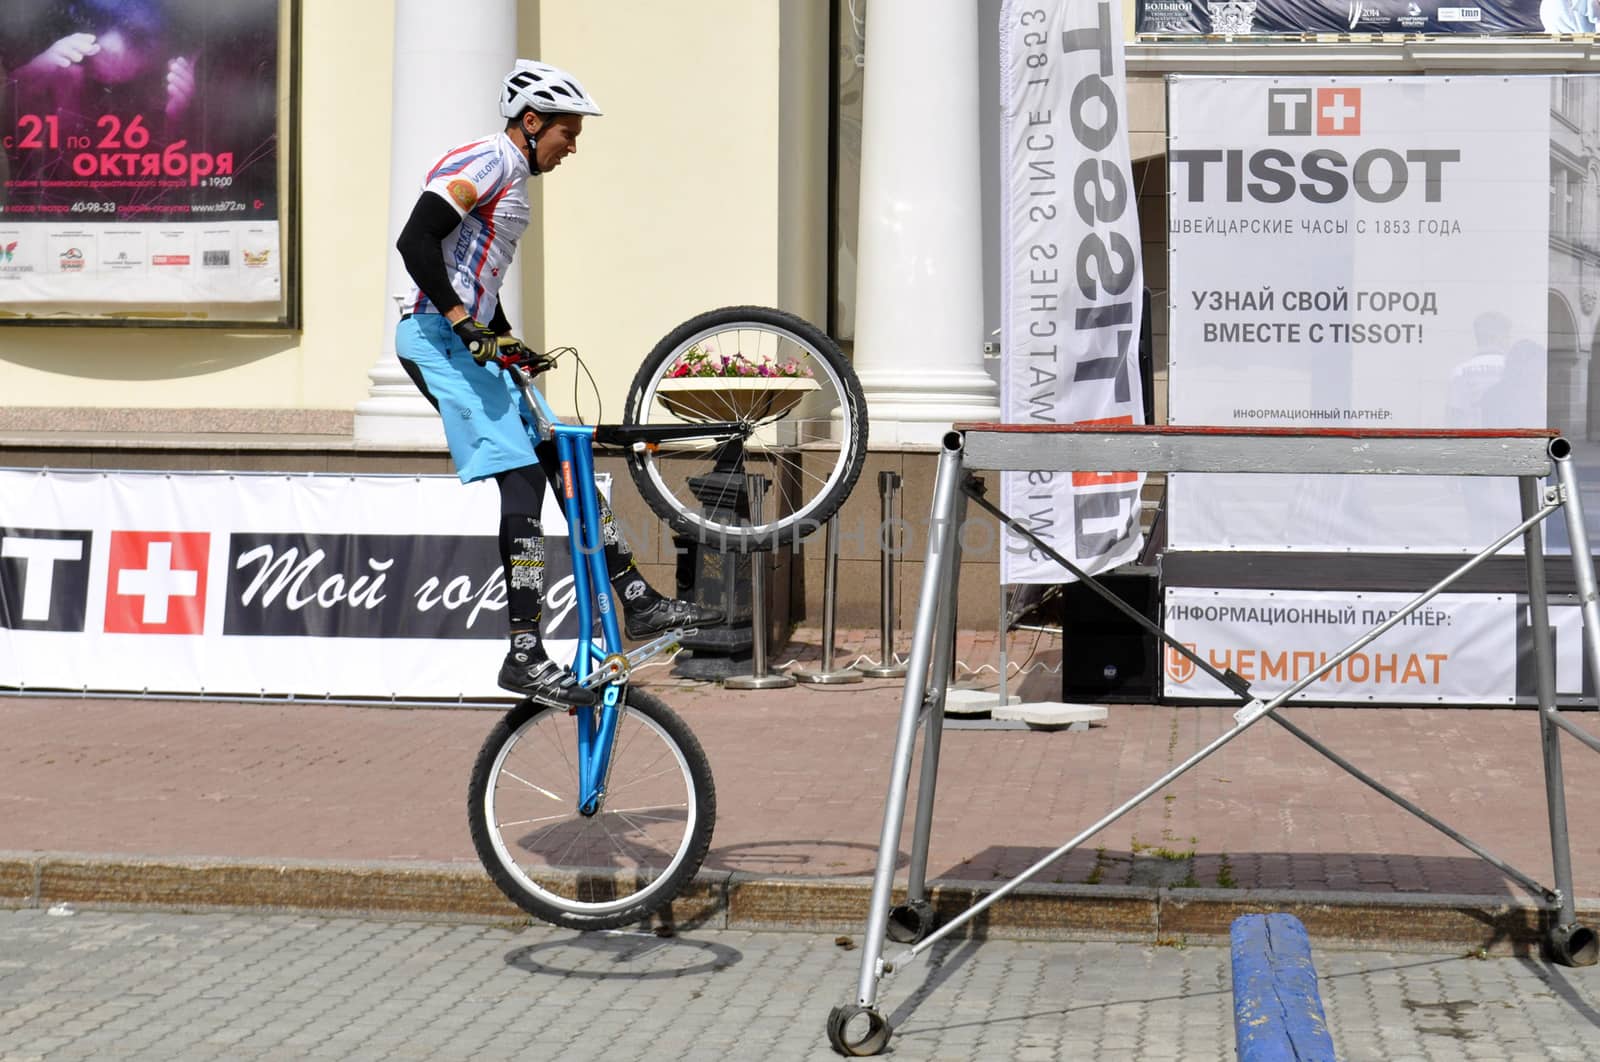  Mikhail Sukhanov performance, champions of Russia on a cycle trial. City Day of Tyumen on July 26, 2014